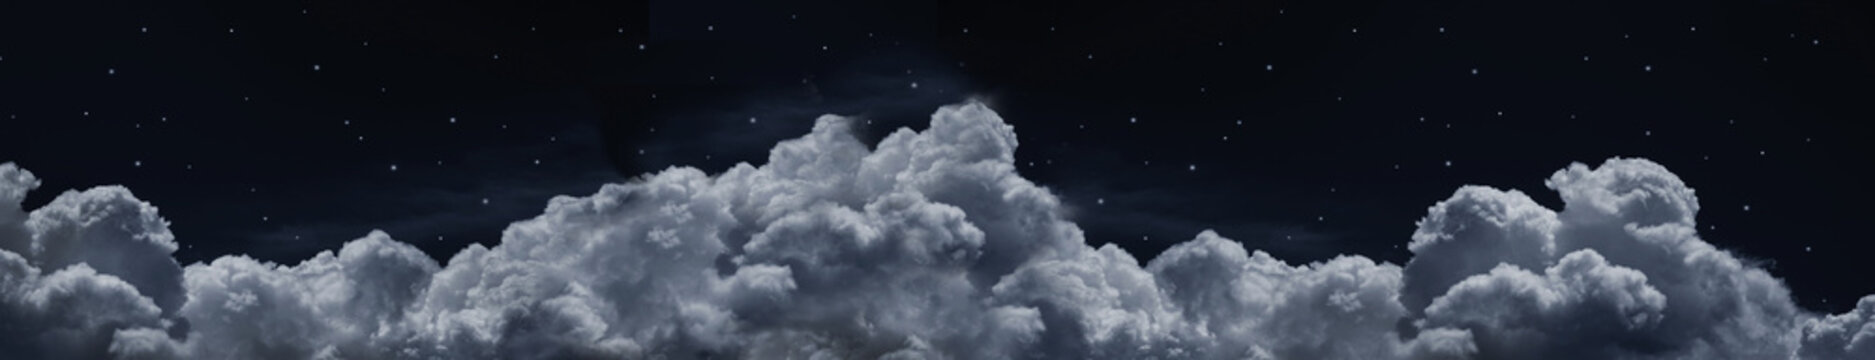 Wall Mural -  - Black dark blue night sky. Stars. White cumulus clouds. Moonlight, starlight. Background. Astrology, astronomy, science fiction, fantasy, dream. Storm front. Dramatic. Wide banner. Panoramic.